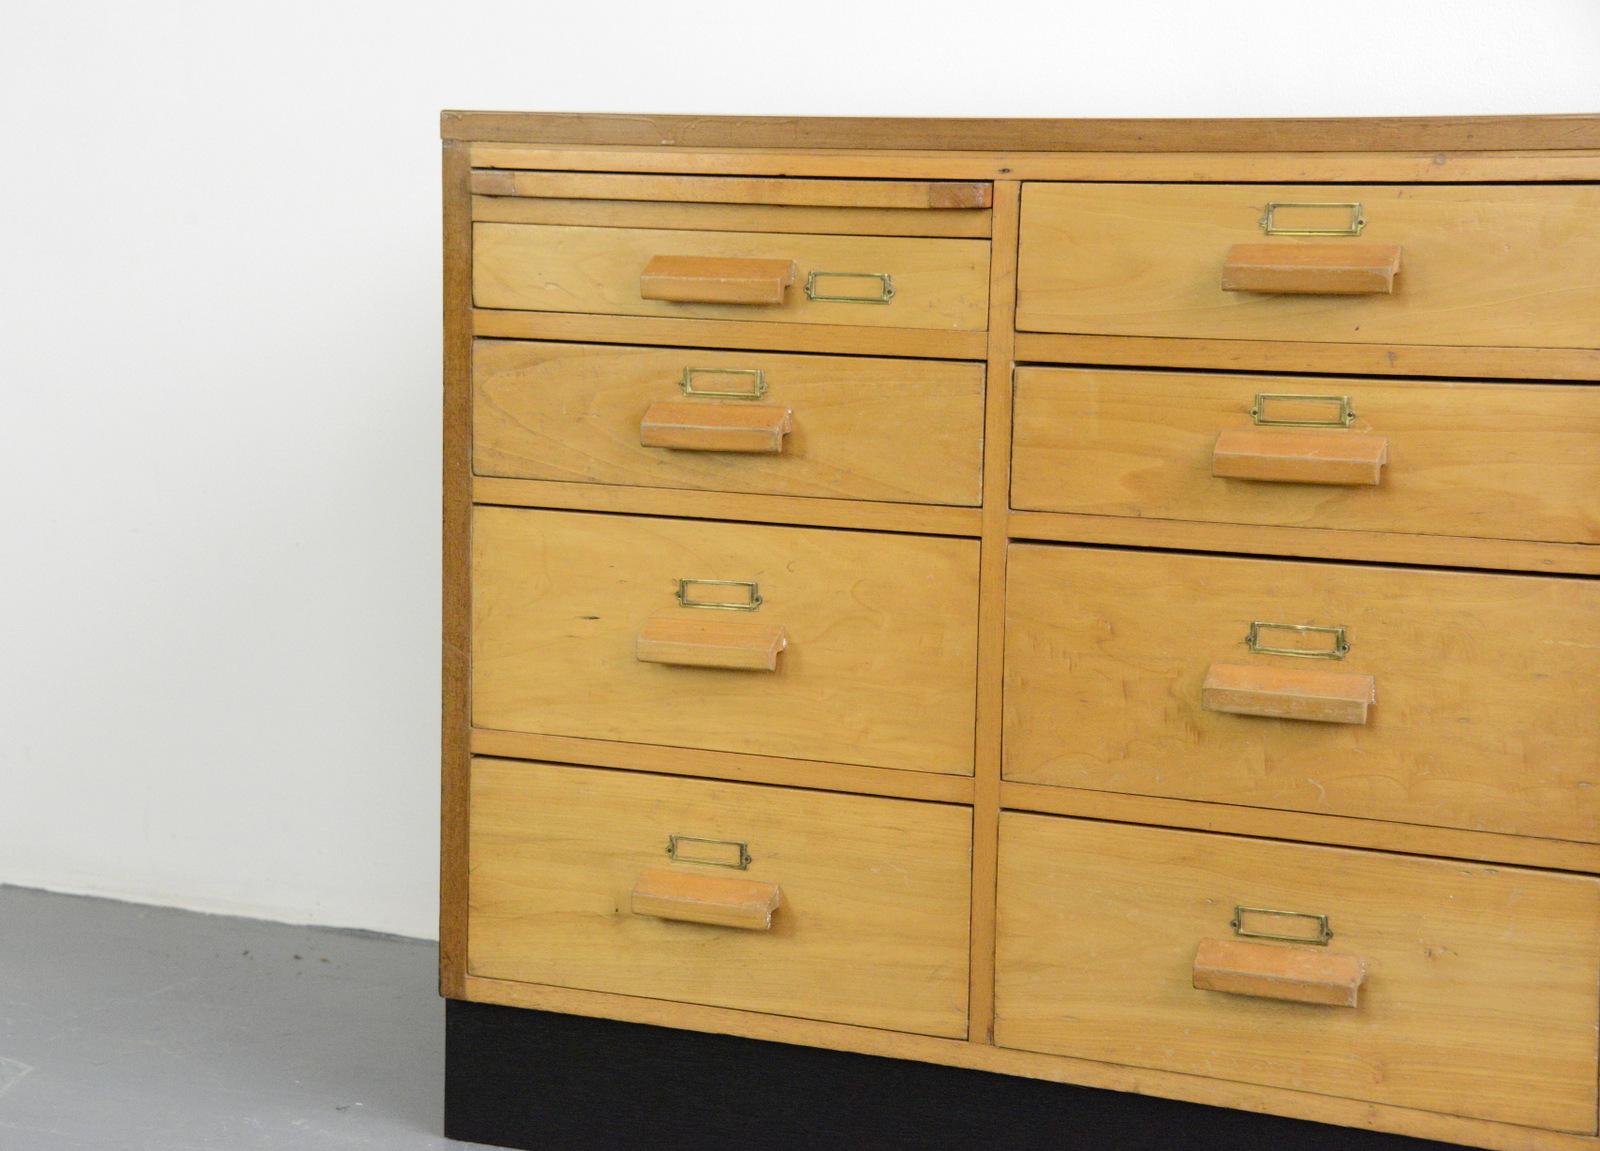 English midcentury beech post office drawers

- Solid beech with teak top
- Original brass card holders
- Black ply back and sides
- Originally came from a post office
- English, 1950s
- Measures: 183 cm long x 47 cm deep x 83 cm